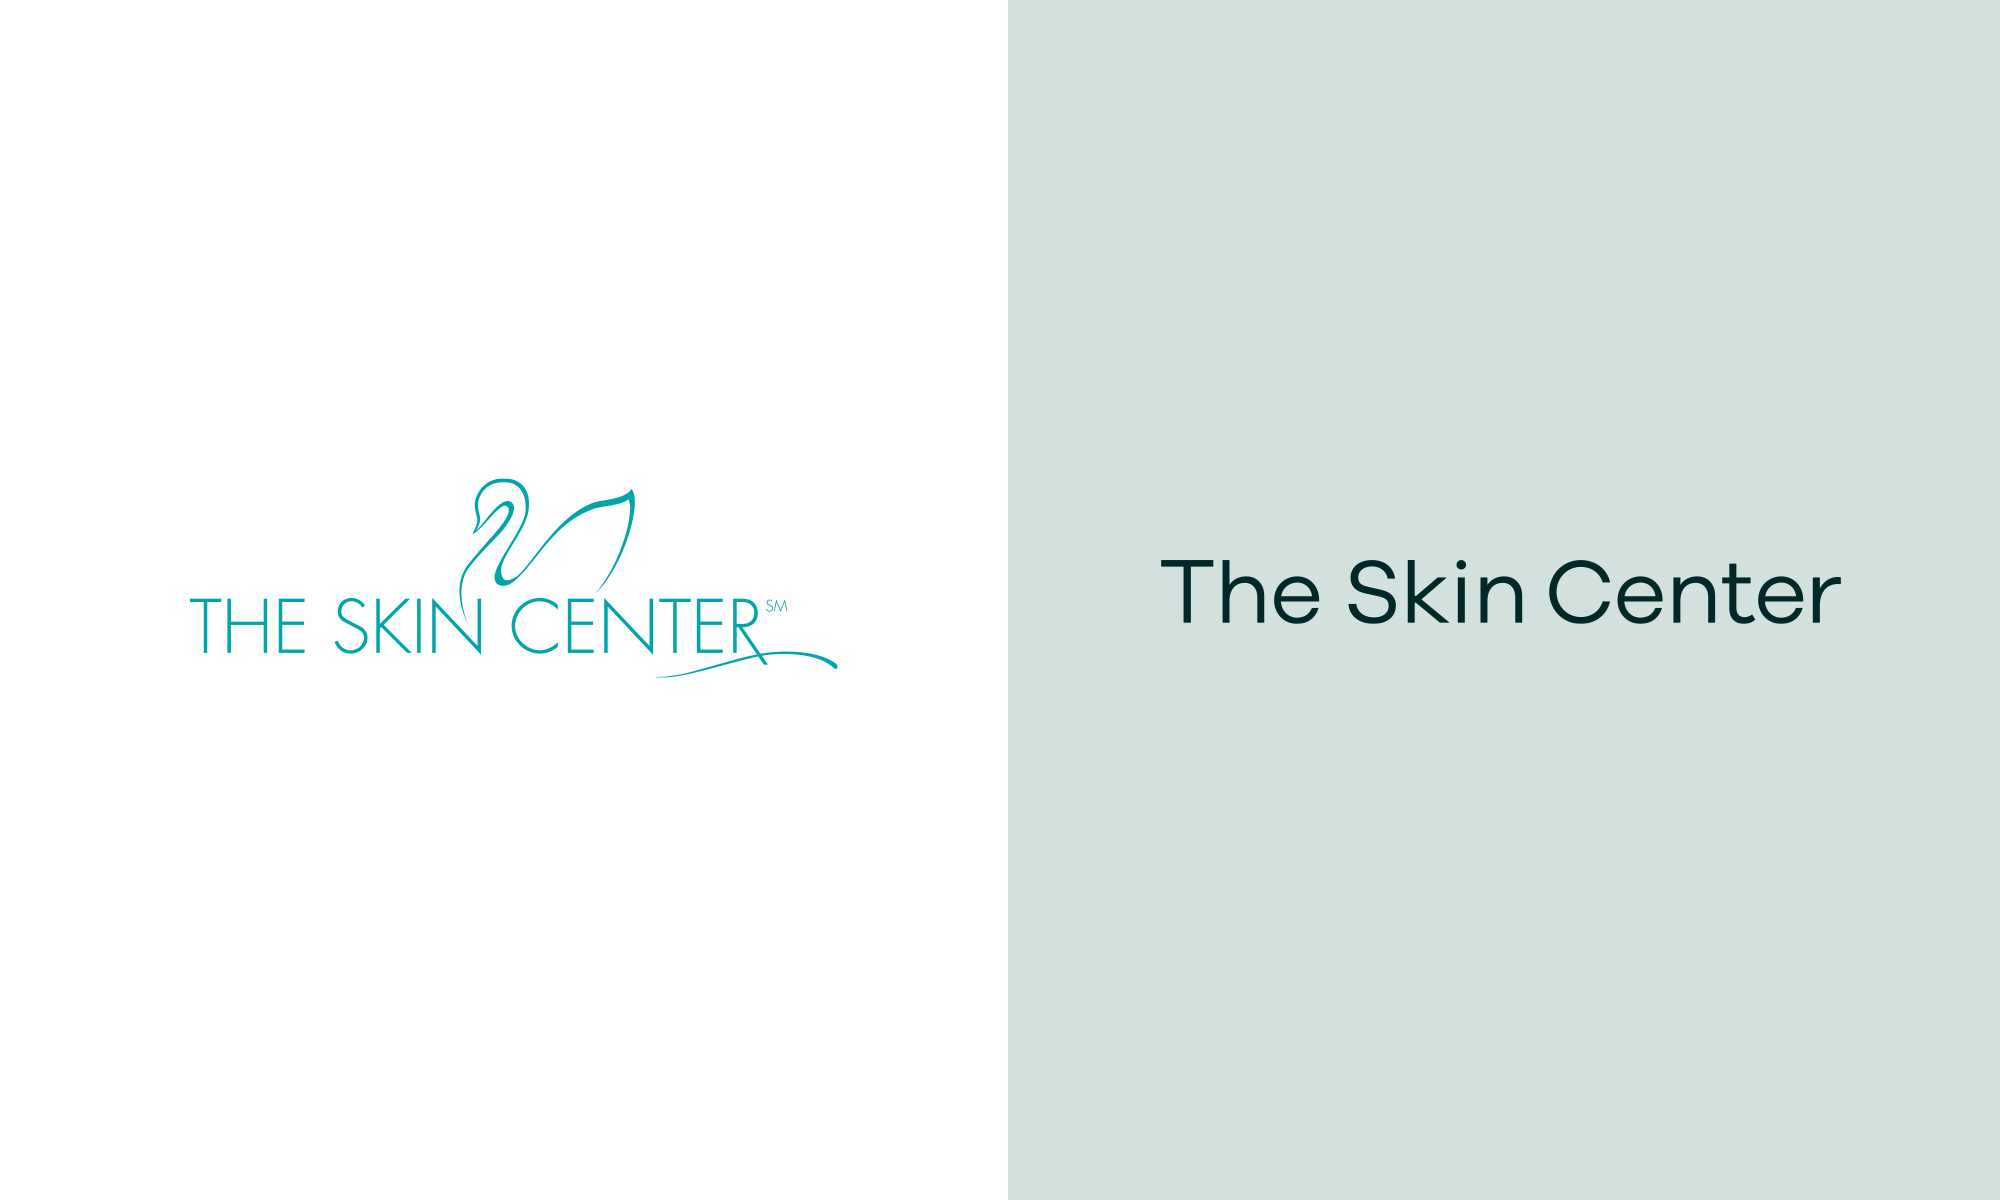 The Skin Center logo before after